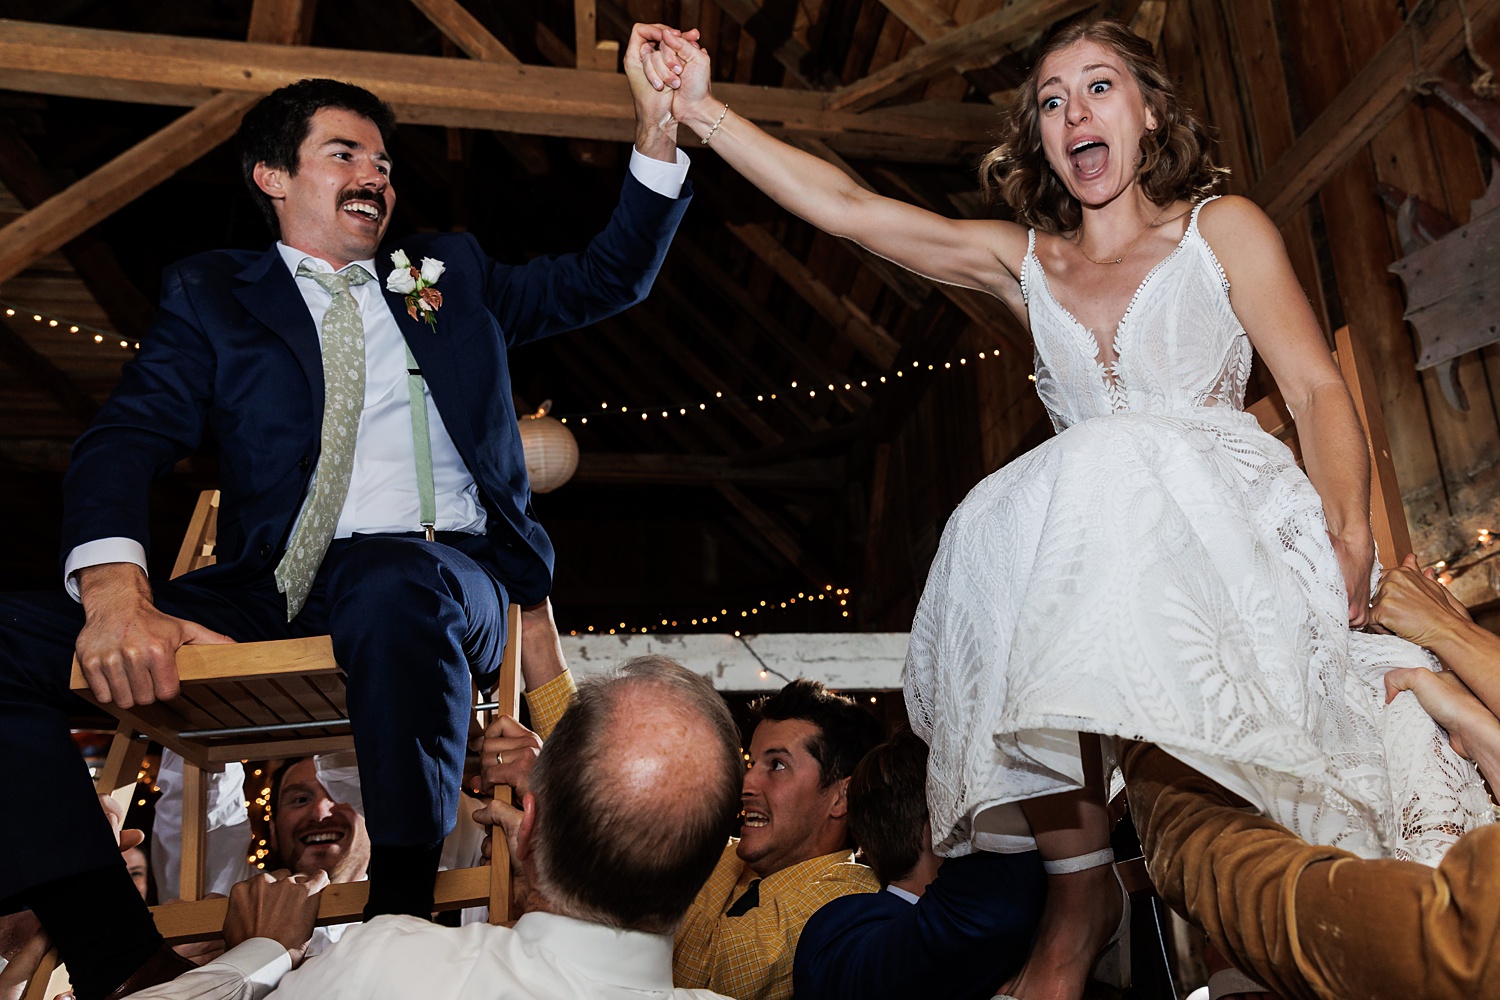 The horah celebration gets wild in the barn at the wedding reception